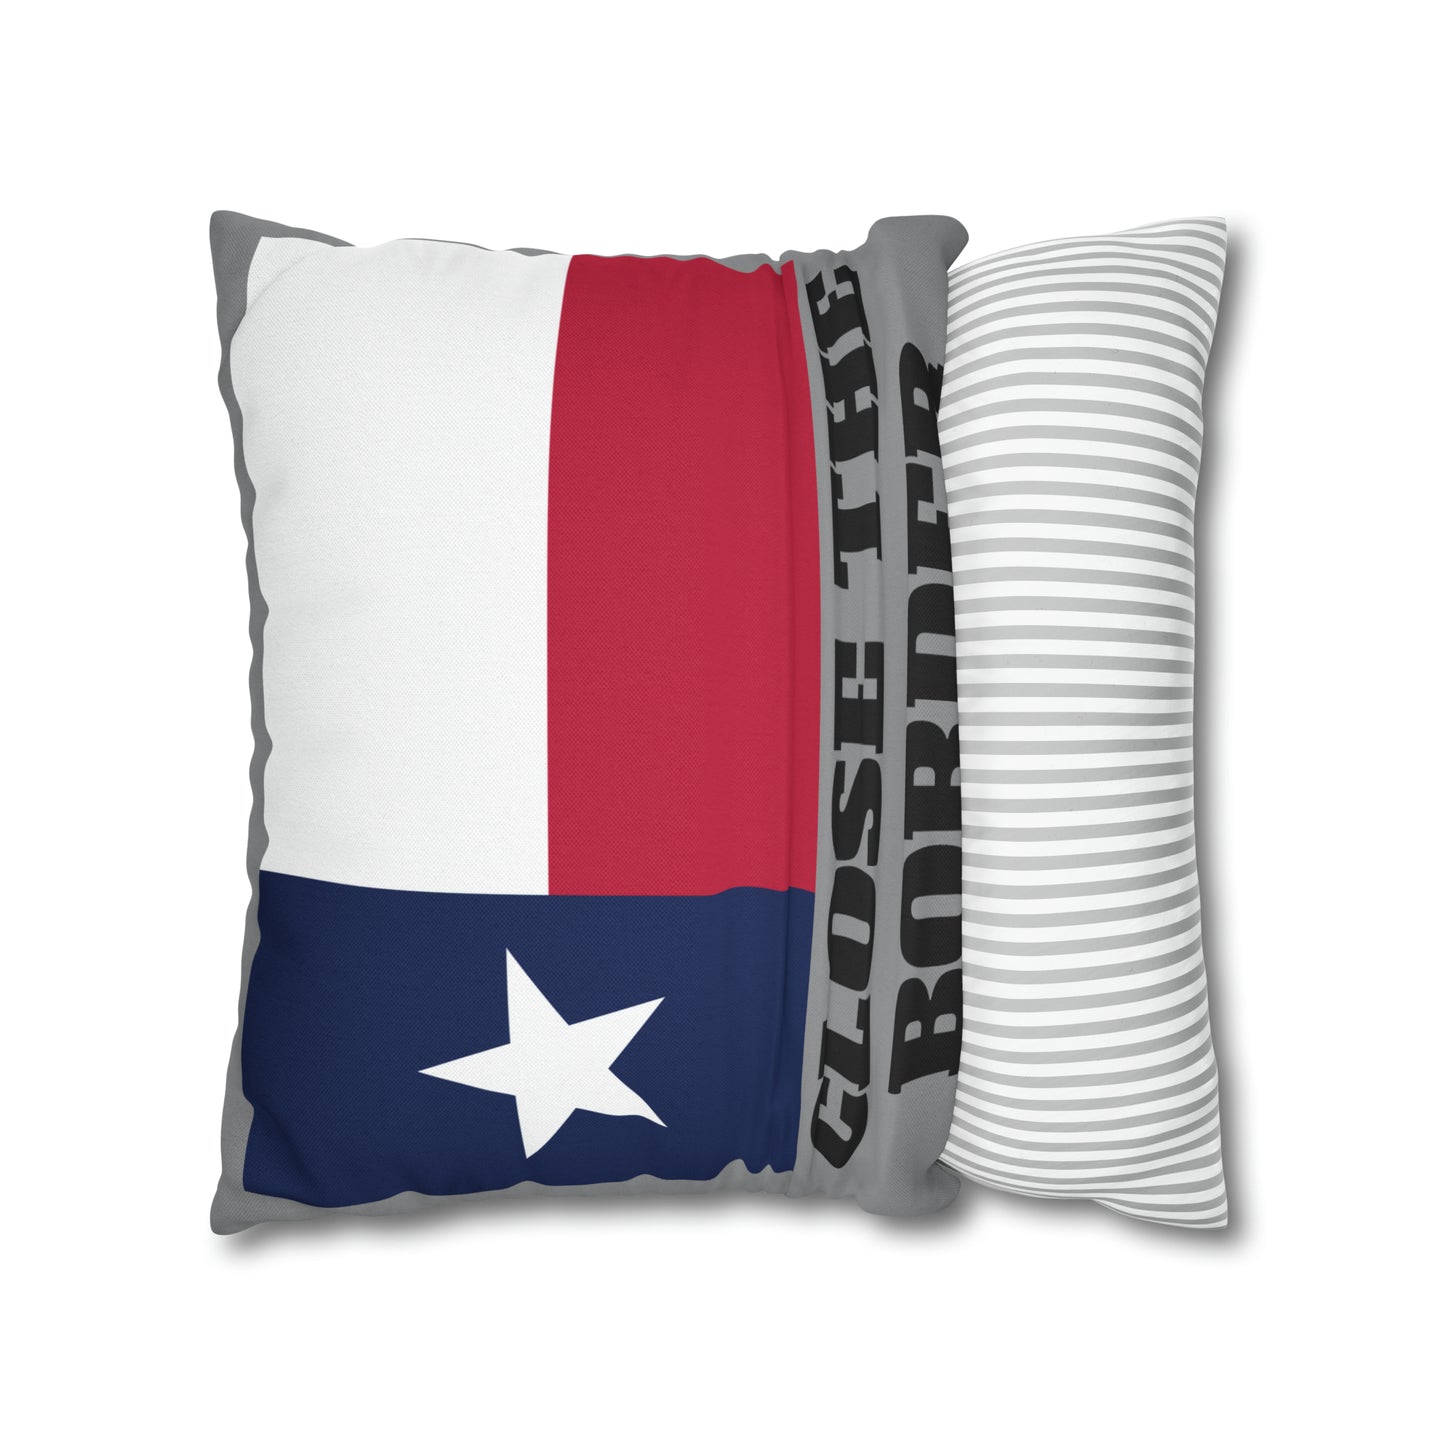 I stand with Texas Close the Border 2-sided Throw Pillow Case